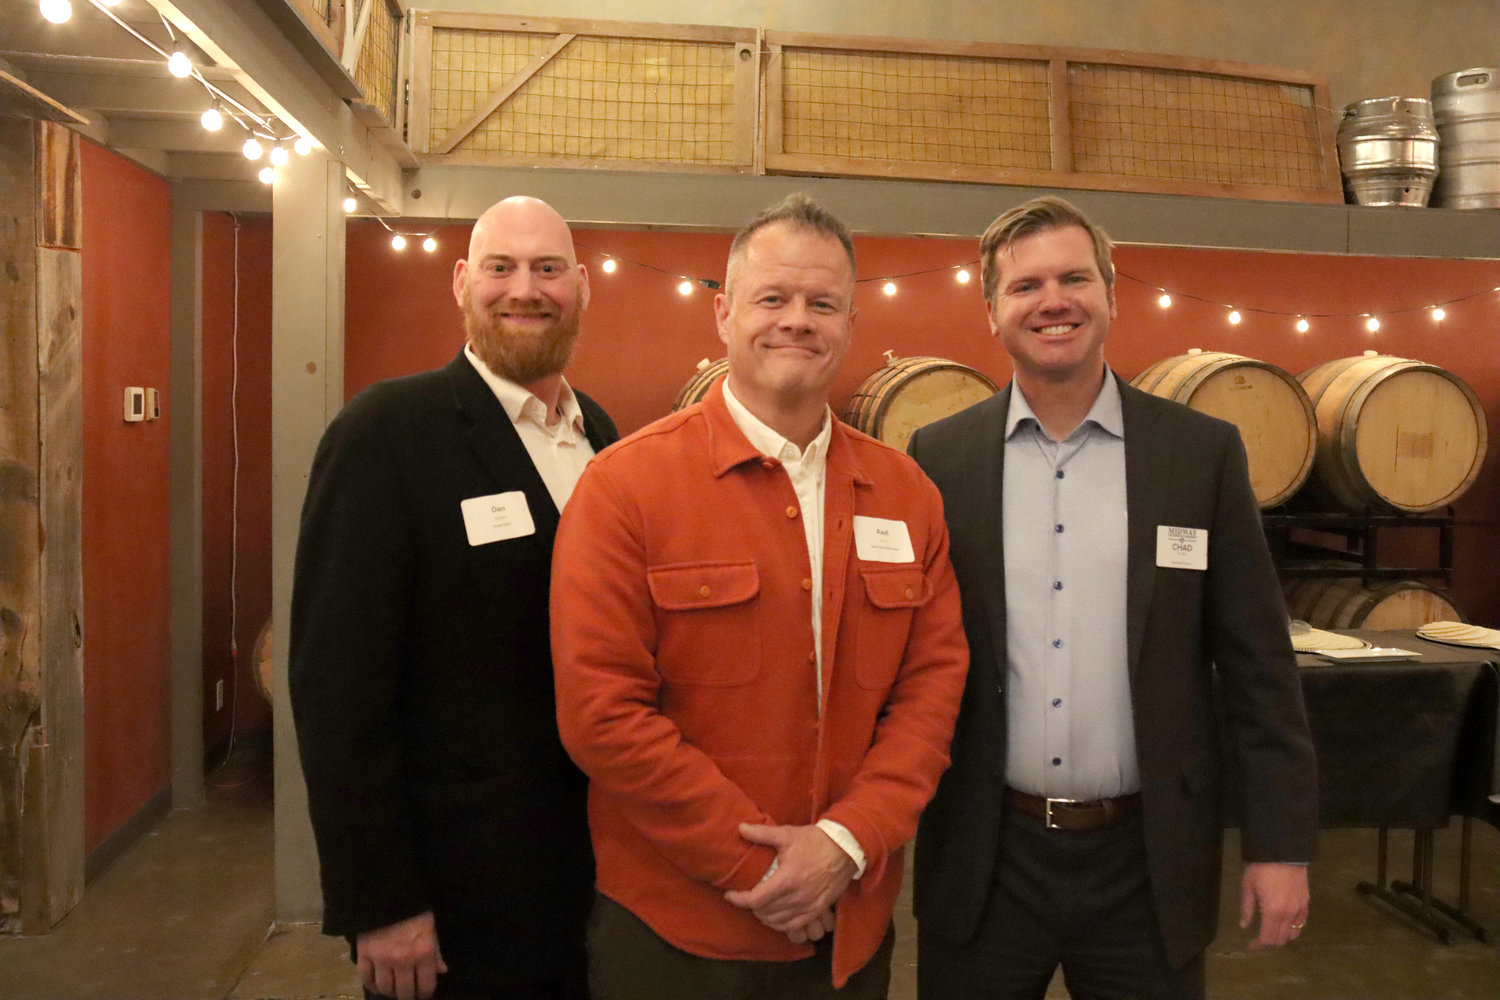 Left to right: Chamber Ambassador Dan Batten of Drake Bank, St. Paul Police Chief Axel Henry, and Midway Chamber Executive Director Chad Kulas. (Photo by Tesha M. Christensen)